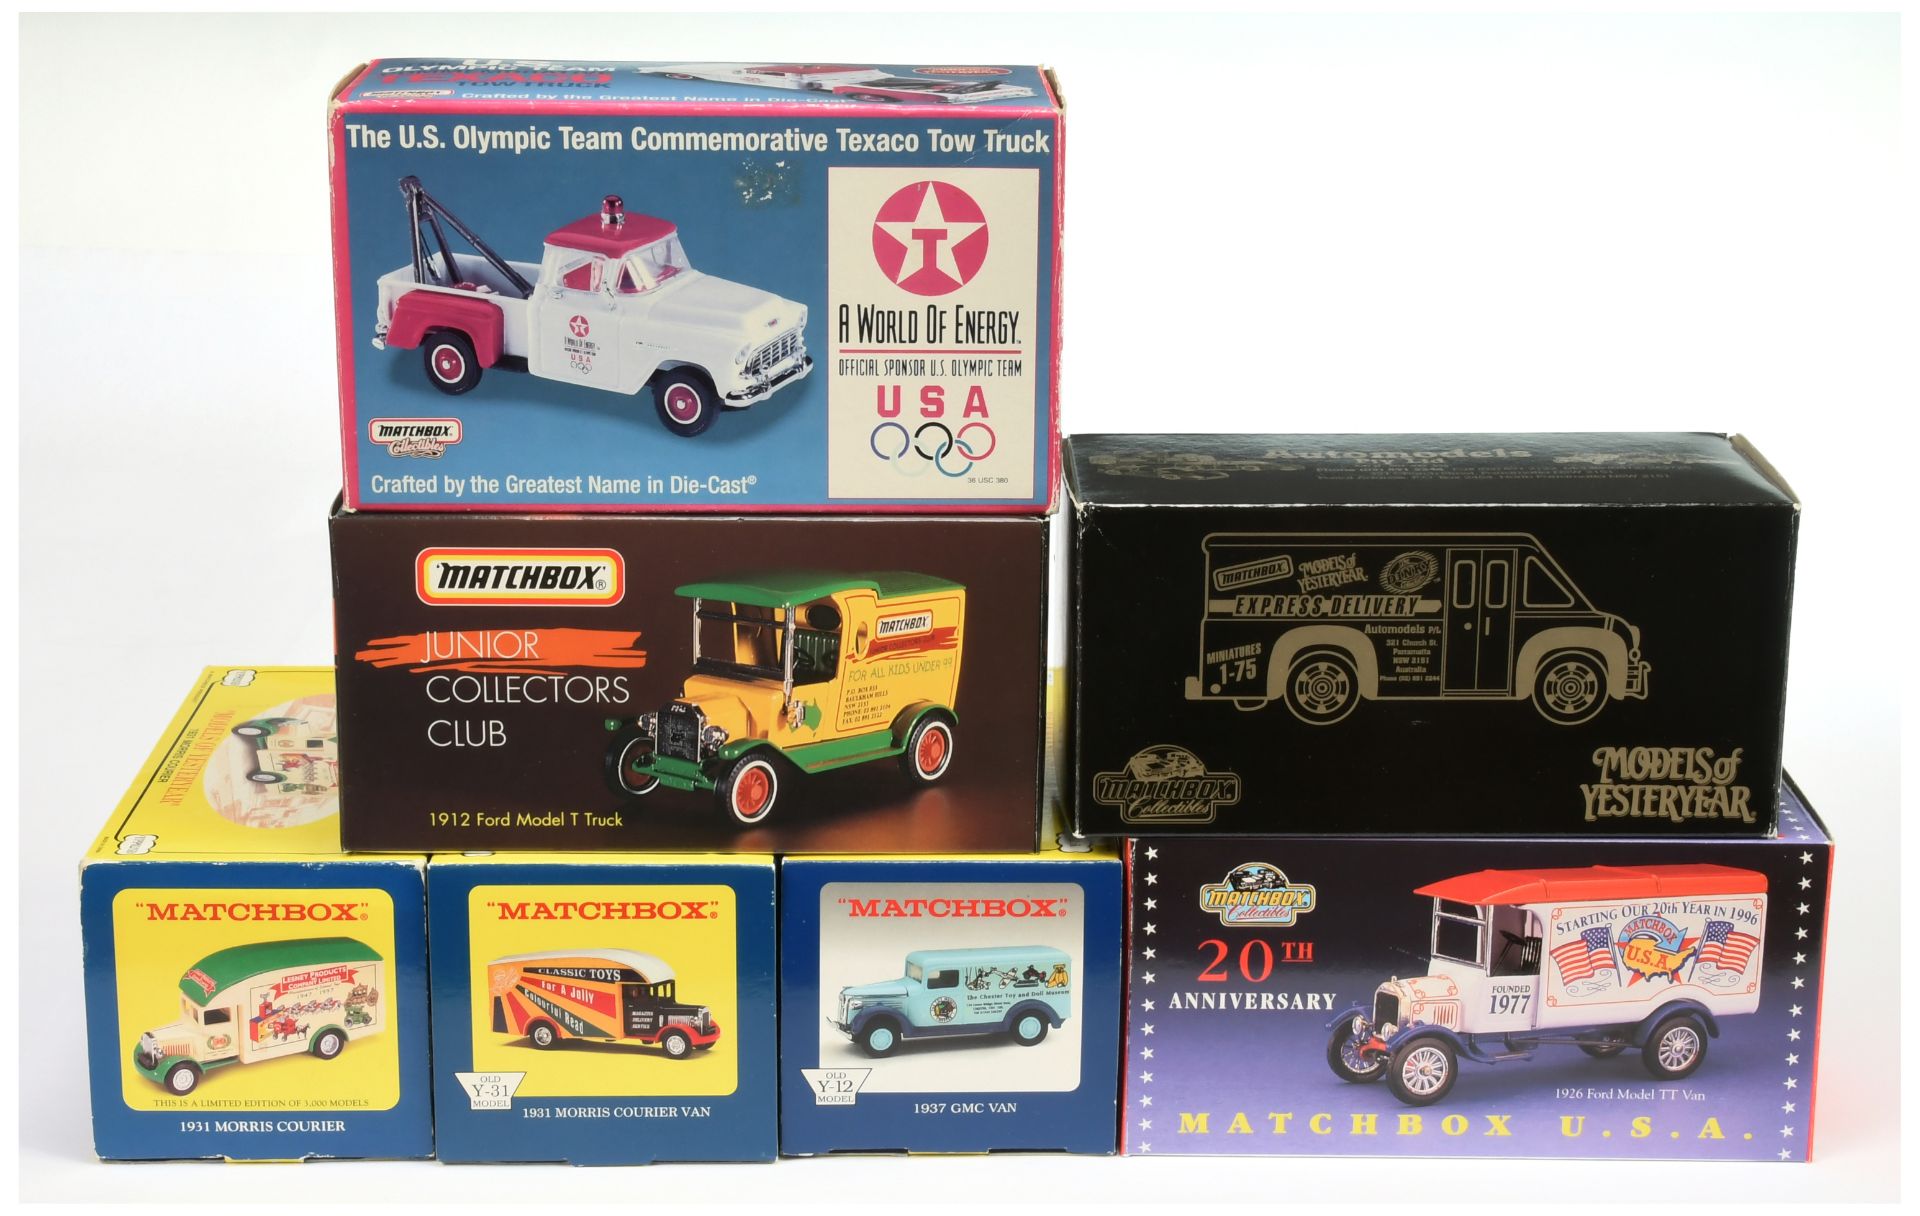 Matchbox Models of Yesteryear a group of models from the Collectibles Era to include Y31 1931 Mor...